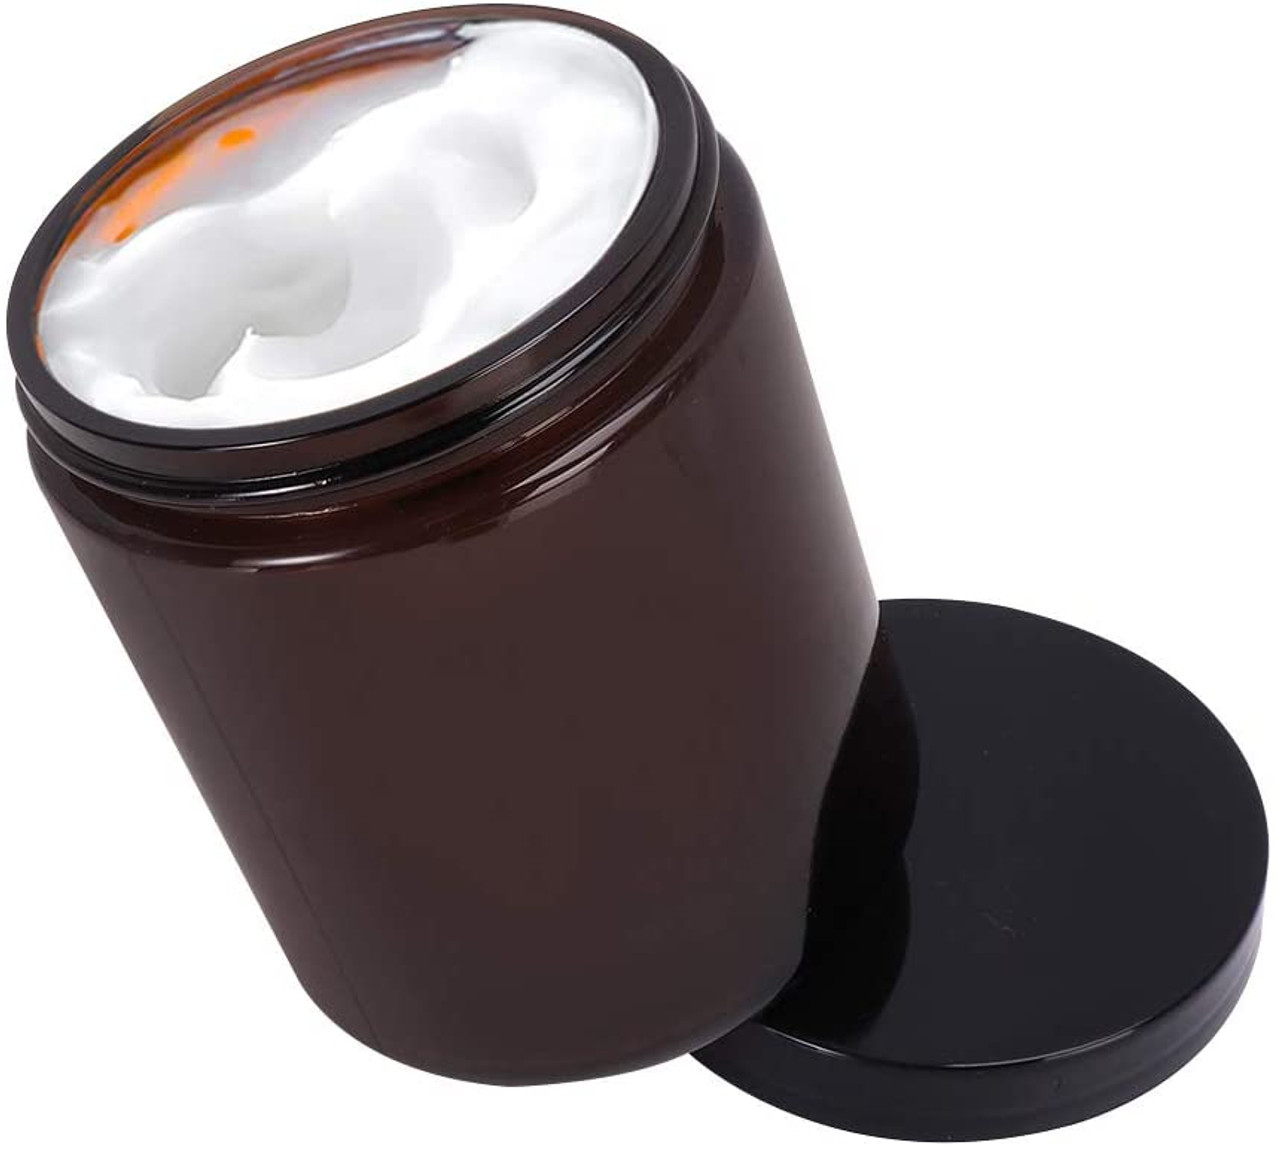 8 ounce Glass Jars with Lids Manufacturer Factory, Supplier